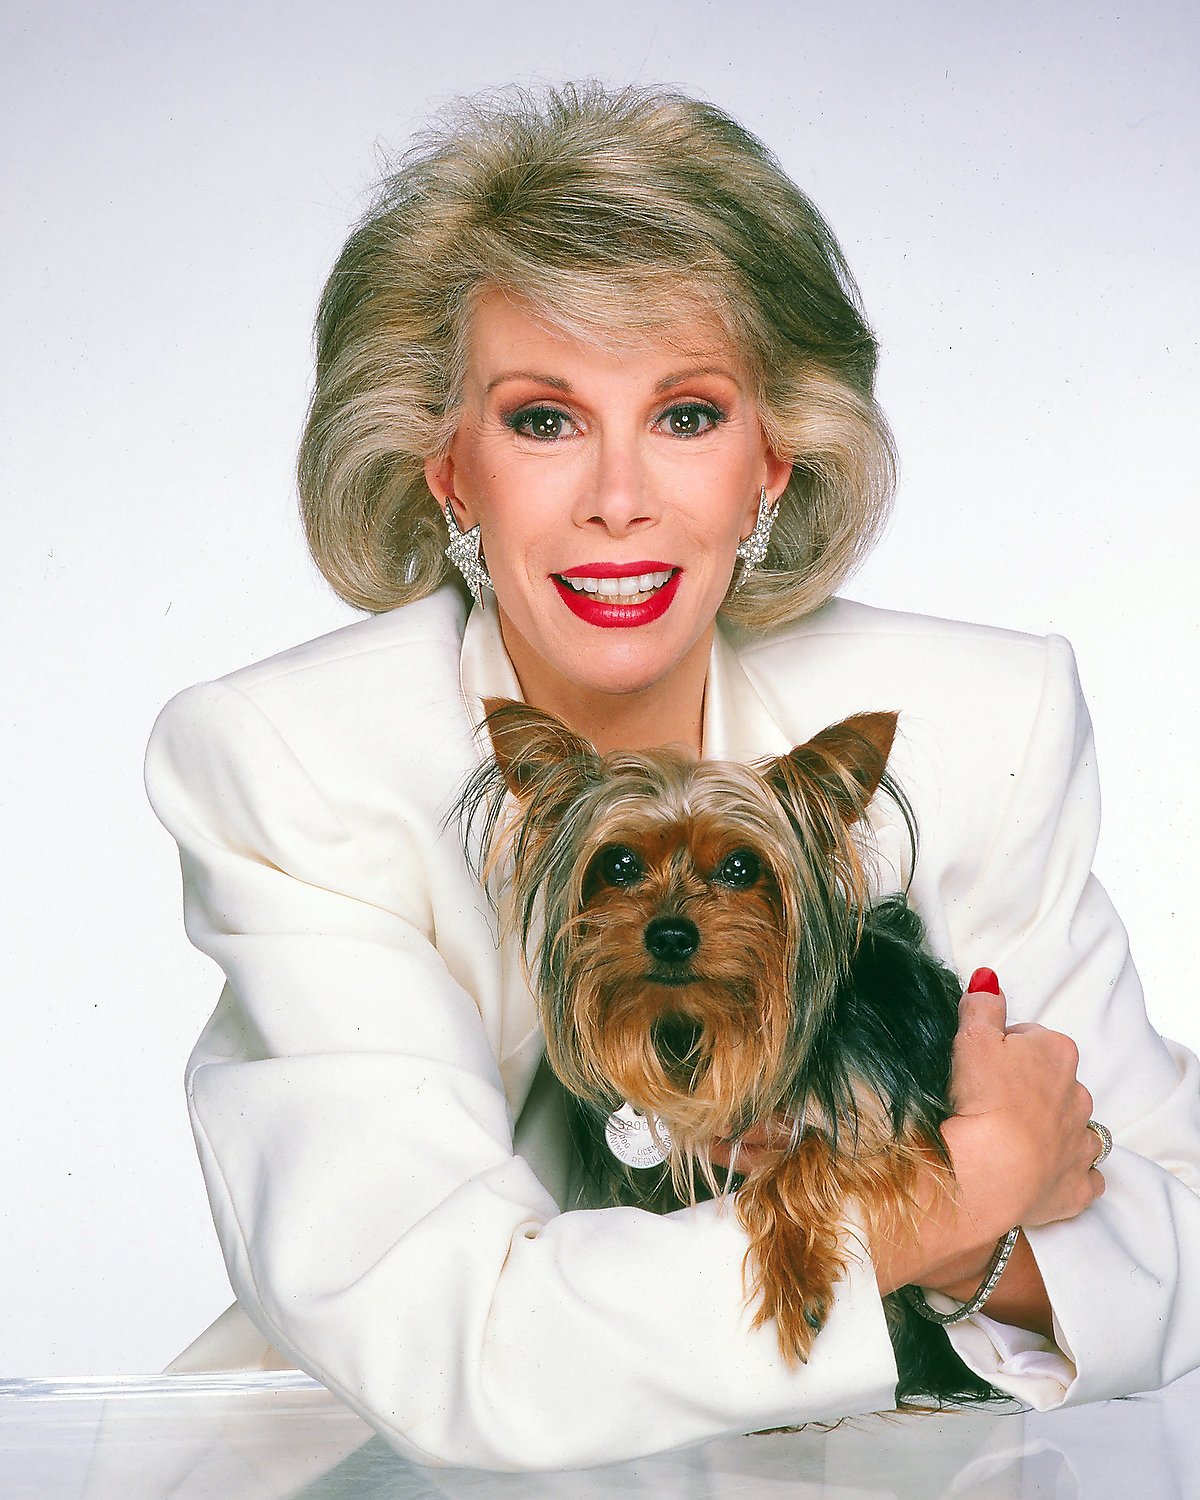 Joan Rivers with her arms around her Yorkshire Terrier on the table